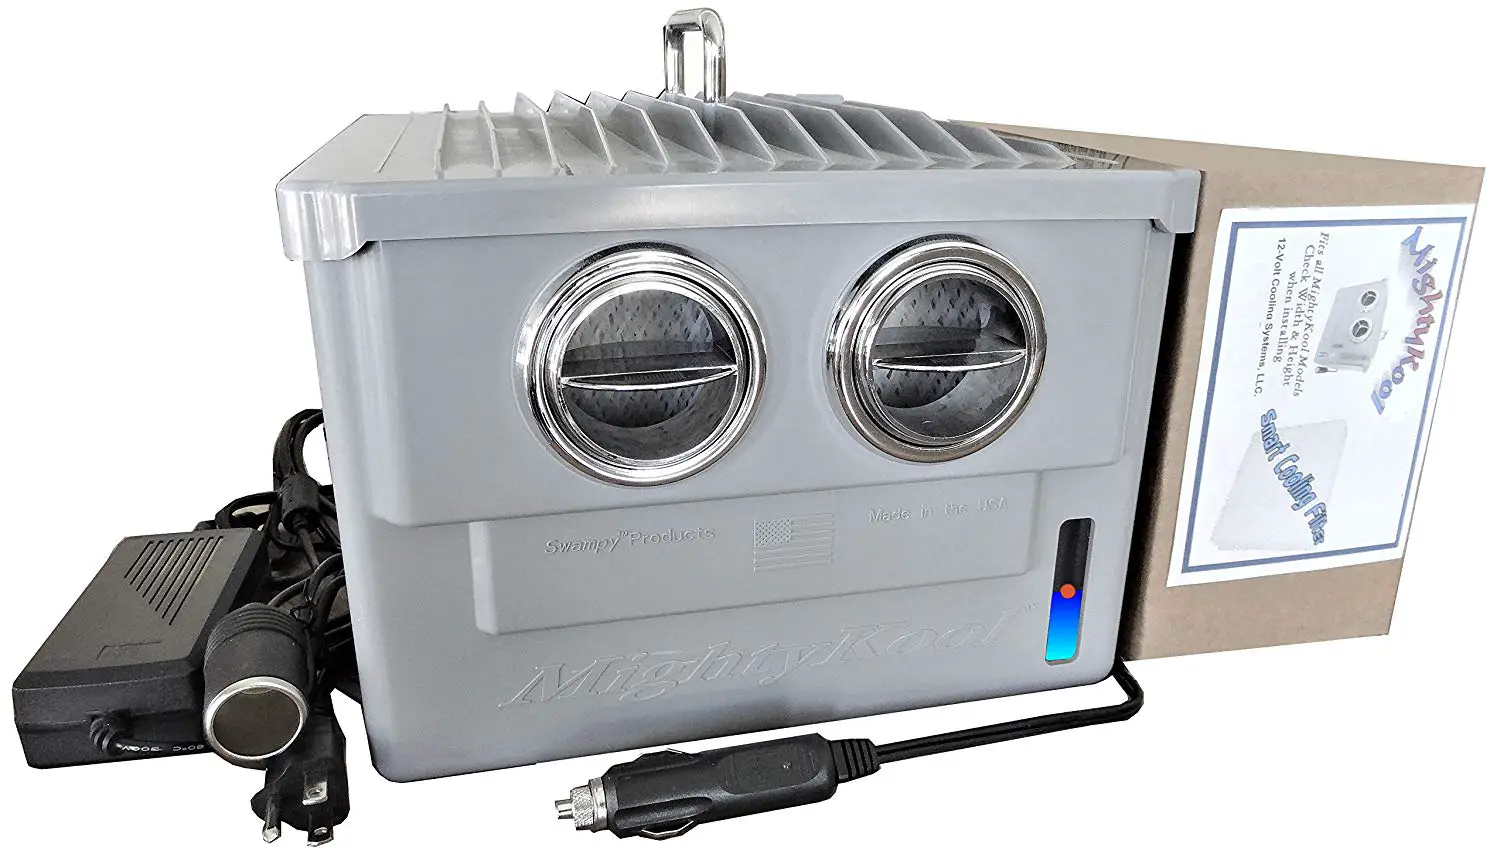 The Best 12 Volt Fans And Air Conditioners For Car Heatwhizcom.